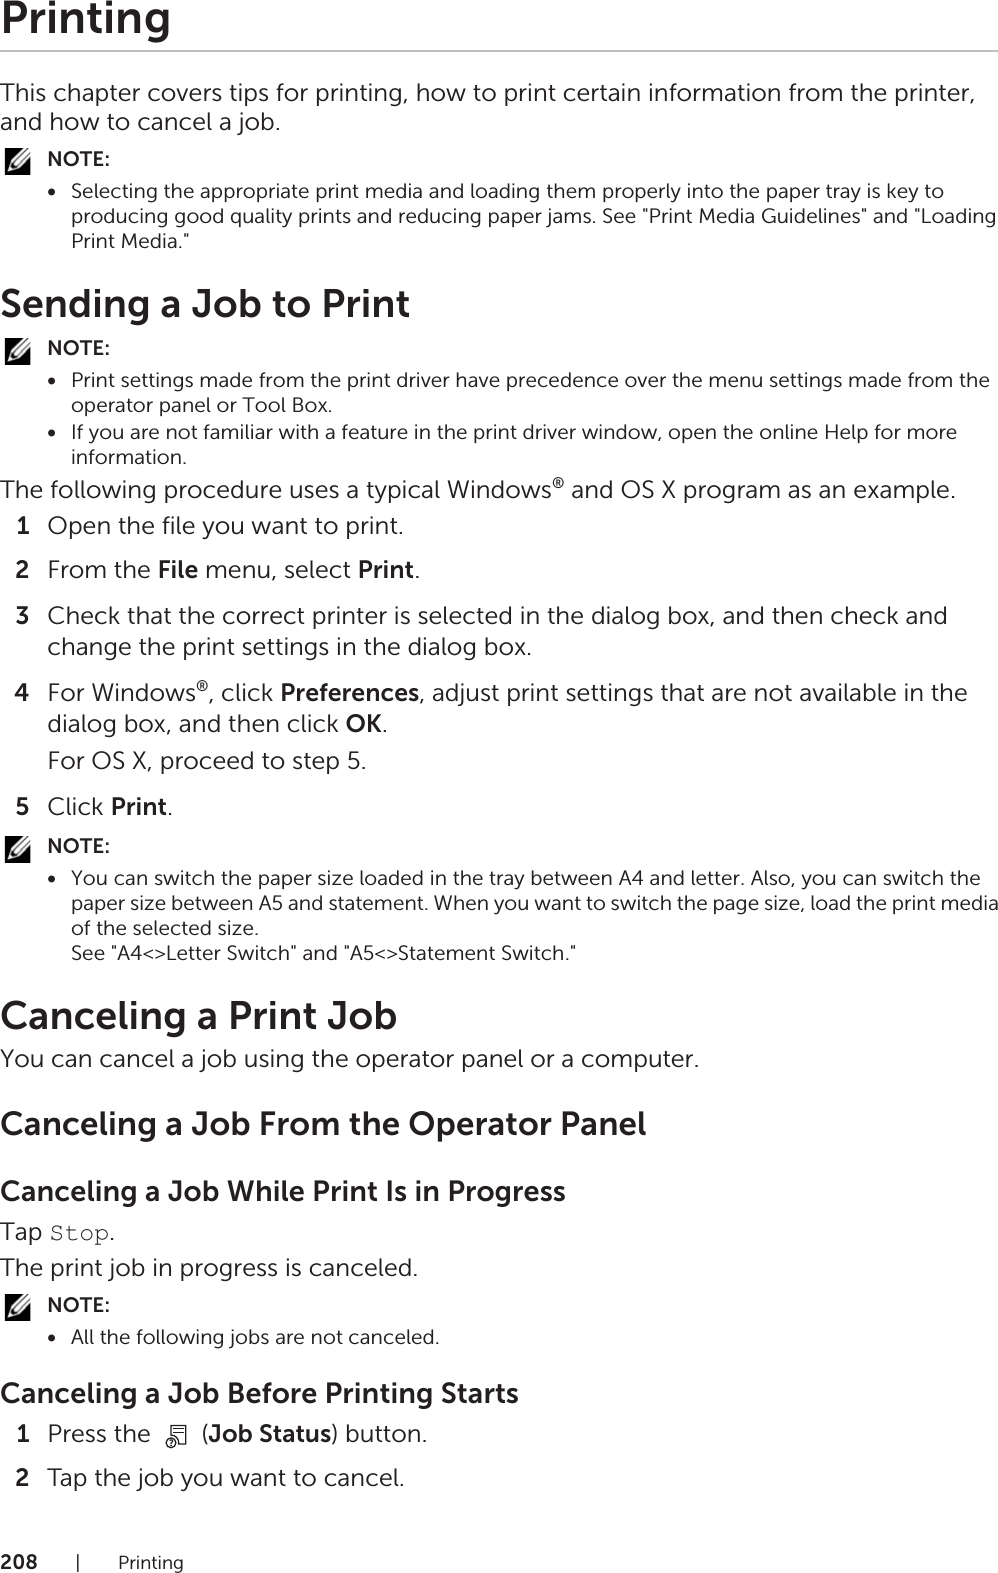 208|PrintingPrintingThis chapter covers tips for printing, how to print certain information from the printer, and how to cancel a job.NOTE:•Selecting the appropriate print media and loading them properly into the paper tray is key to producing good quality prints and reducing paper jams. See &quot;Print Media Guidelines&quot; and &quot;Loading Print Media.&quot;Sending a Job to PrintNOTE:•Print settings made from the print driver have precedence over the menu settings made from the operator panel or Tool Box.•If you are not familiar with a feature in the print driver window, open the online Help for more information.The following procedure uses a typical Windows® and OS X program as an example.1Open the file you want to print.2From the File menu, select Print.3Check that the correct printer is selected in the dialog box, and then check and change the print settings in the dialog box.4For Windows®, click Preferences, adjust print settings that are not available in the dialog box, and then click OK.For OS X, proceed to step 5.5Click Print.NOTE:•You can switch the paper size loaded in the tray between A4 and letter. Also, you can switch the paper size between A5 and statement. When you want to switch the page size, load the print media of the selected size.See &quot;A4&lt;&gt;Letter Switch&quot; and &quot;A5&lt;&gt;Statement Switch.&quot;Canceling a Print JobYou can cancel a job using the operator panel or a computer.Canceling a Job From the Operator PanelCanceling a Job While Print Is in ProgressTap Stop.The print job in progress is canceled.NOTE:•All the following jobs are not canceled.Canceling a Job Before Printing Starts1Press the   (Job Status) button.2Tap the job you want to cancel.